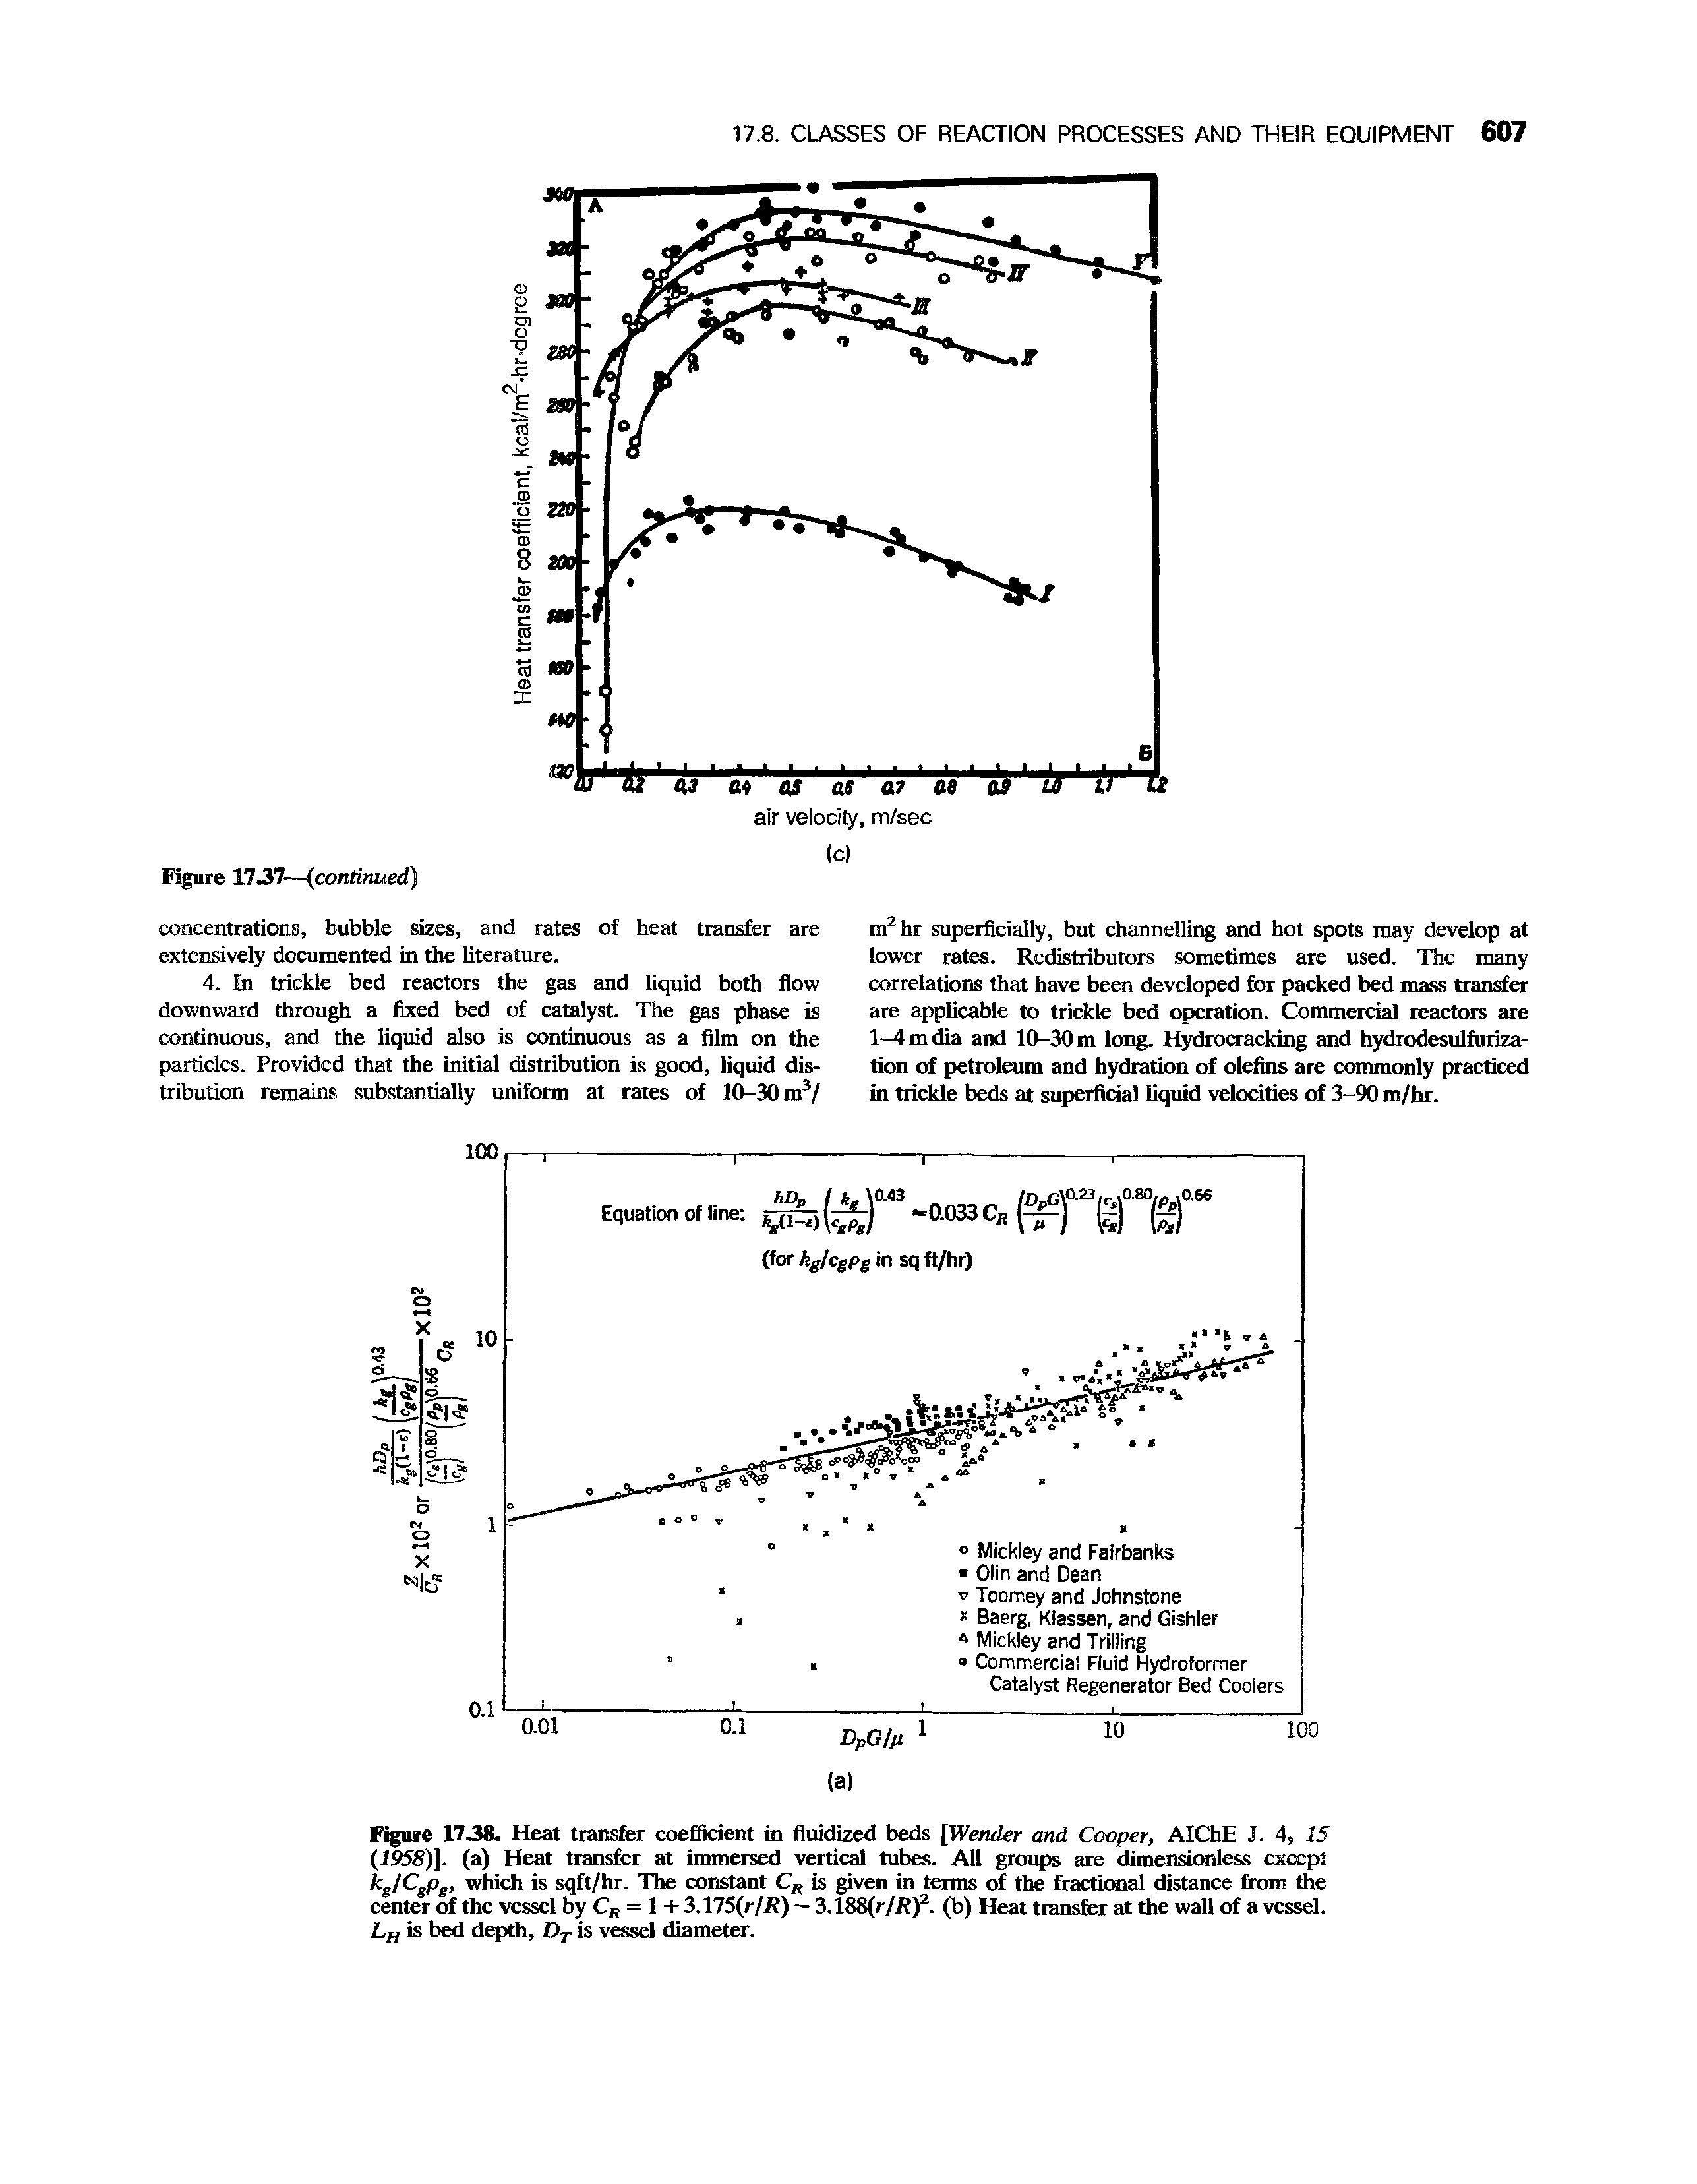 Figure 1738. Heat transfer coefficient in fluidized beds [Wender and Cooper, AIChE J. 4, 15 (1958)]. (a) Heat transfer at immersed vertical tubes. All groups are dimensionless except kgICgpg, which is sqft/hr. The constant CR is given in terms of the fractional distance from the center of the vessel by CR = 1 + 3.175(r/R) — 3.188(r/R)2. (b) Heat transfer at the wall of a vessel. Lh is bed depth, Ot is vessel diameter.